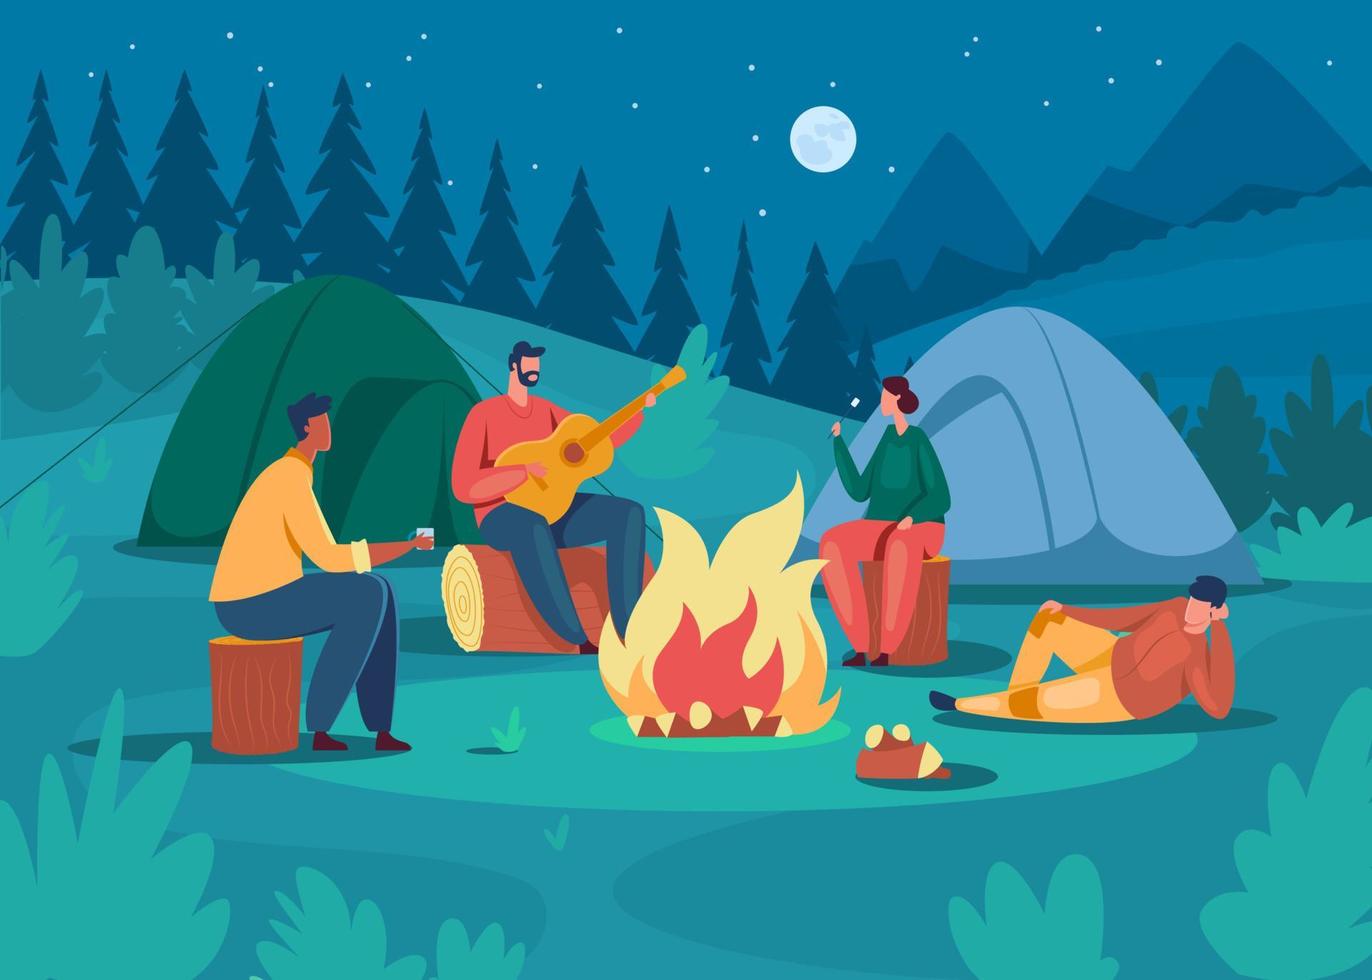 People camping at night. Friends sitting near campfire, playing guitar, roasting marshmallow. Tourism vacation holiday adventure vector illustration